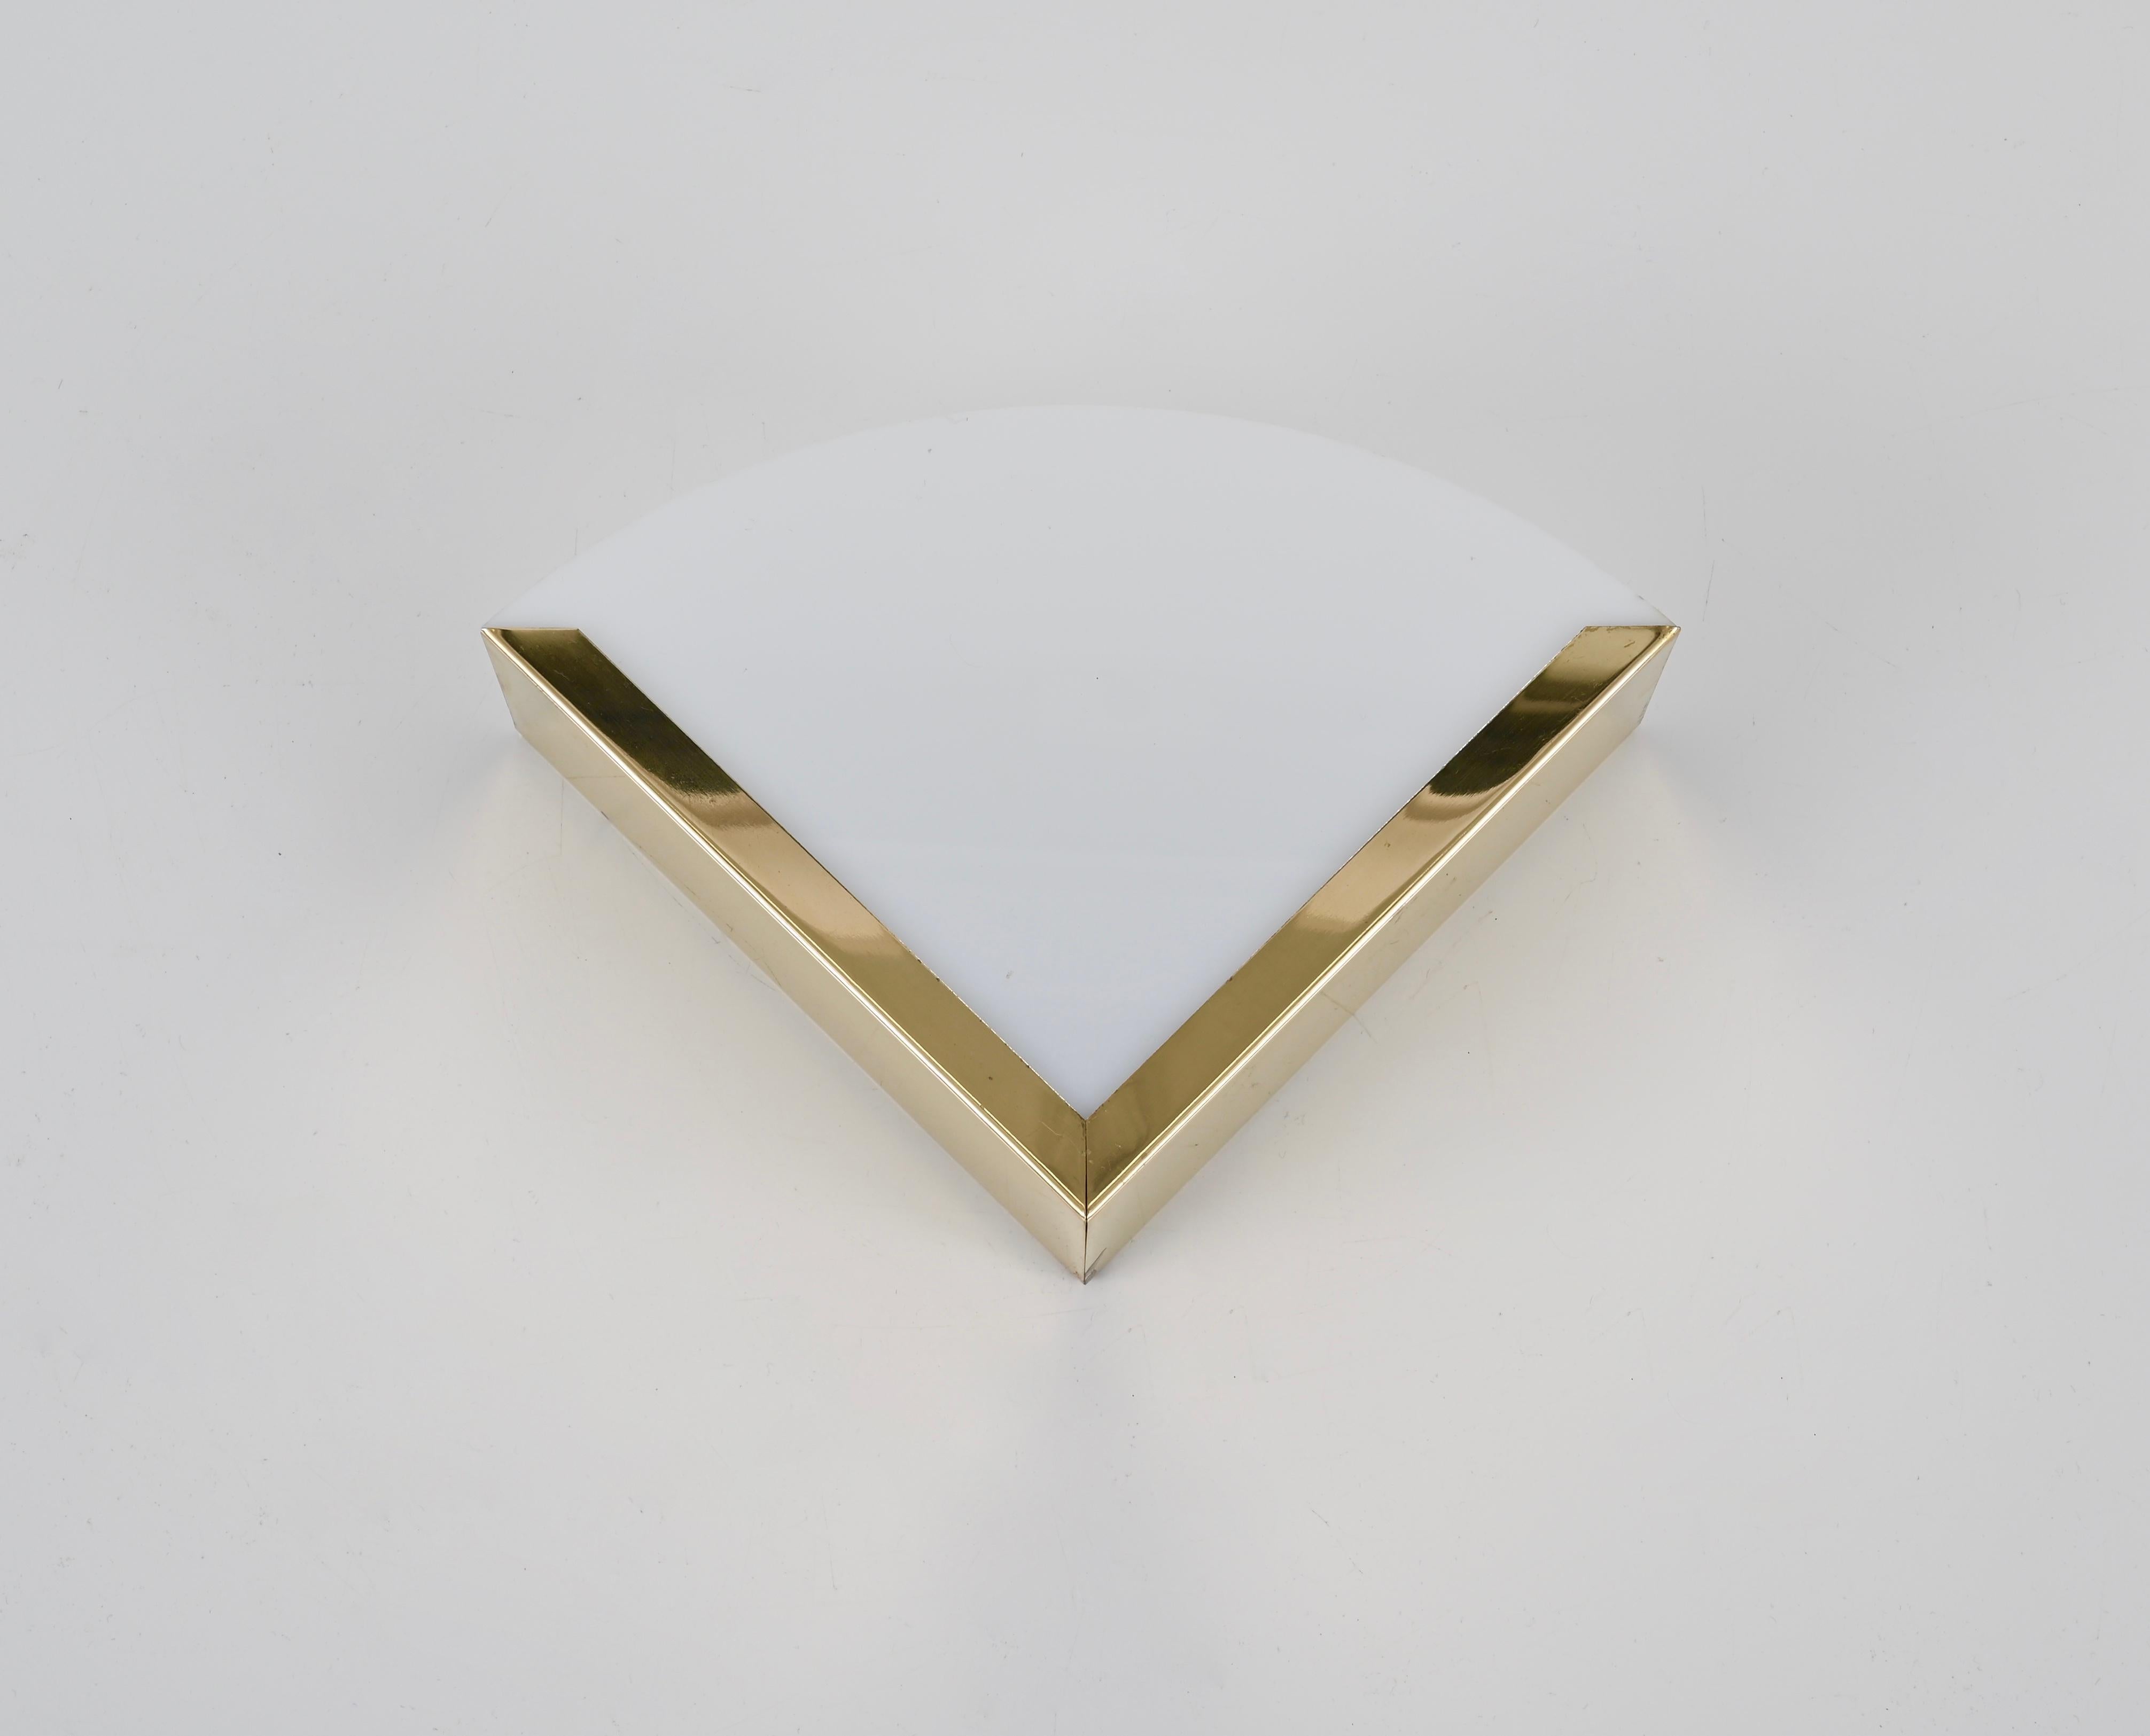 Italian Triangular Sconces in Brass and White Perspex, Italy 1970s For Sale 6